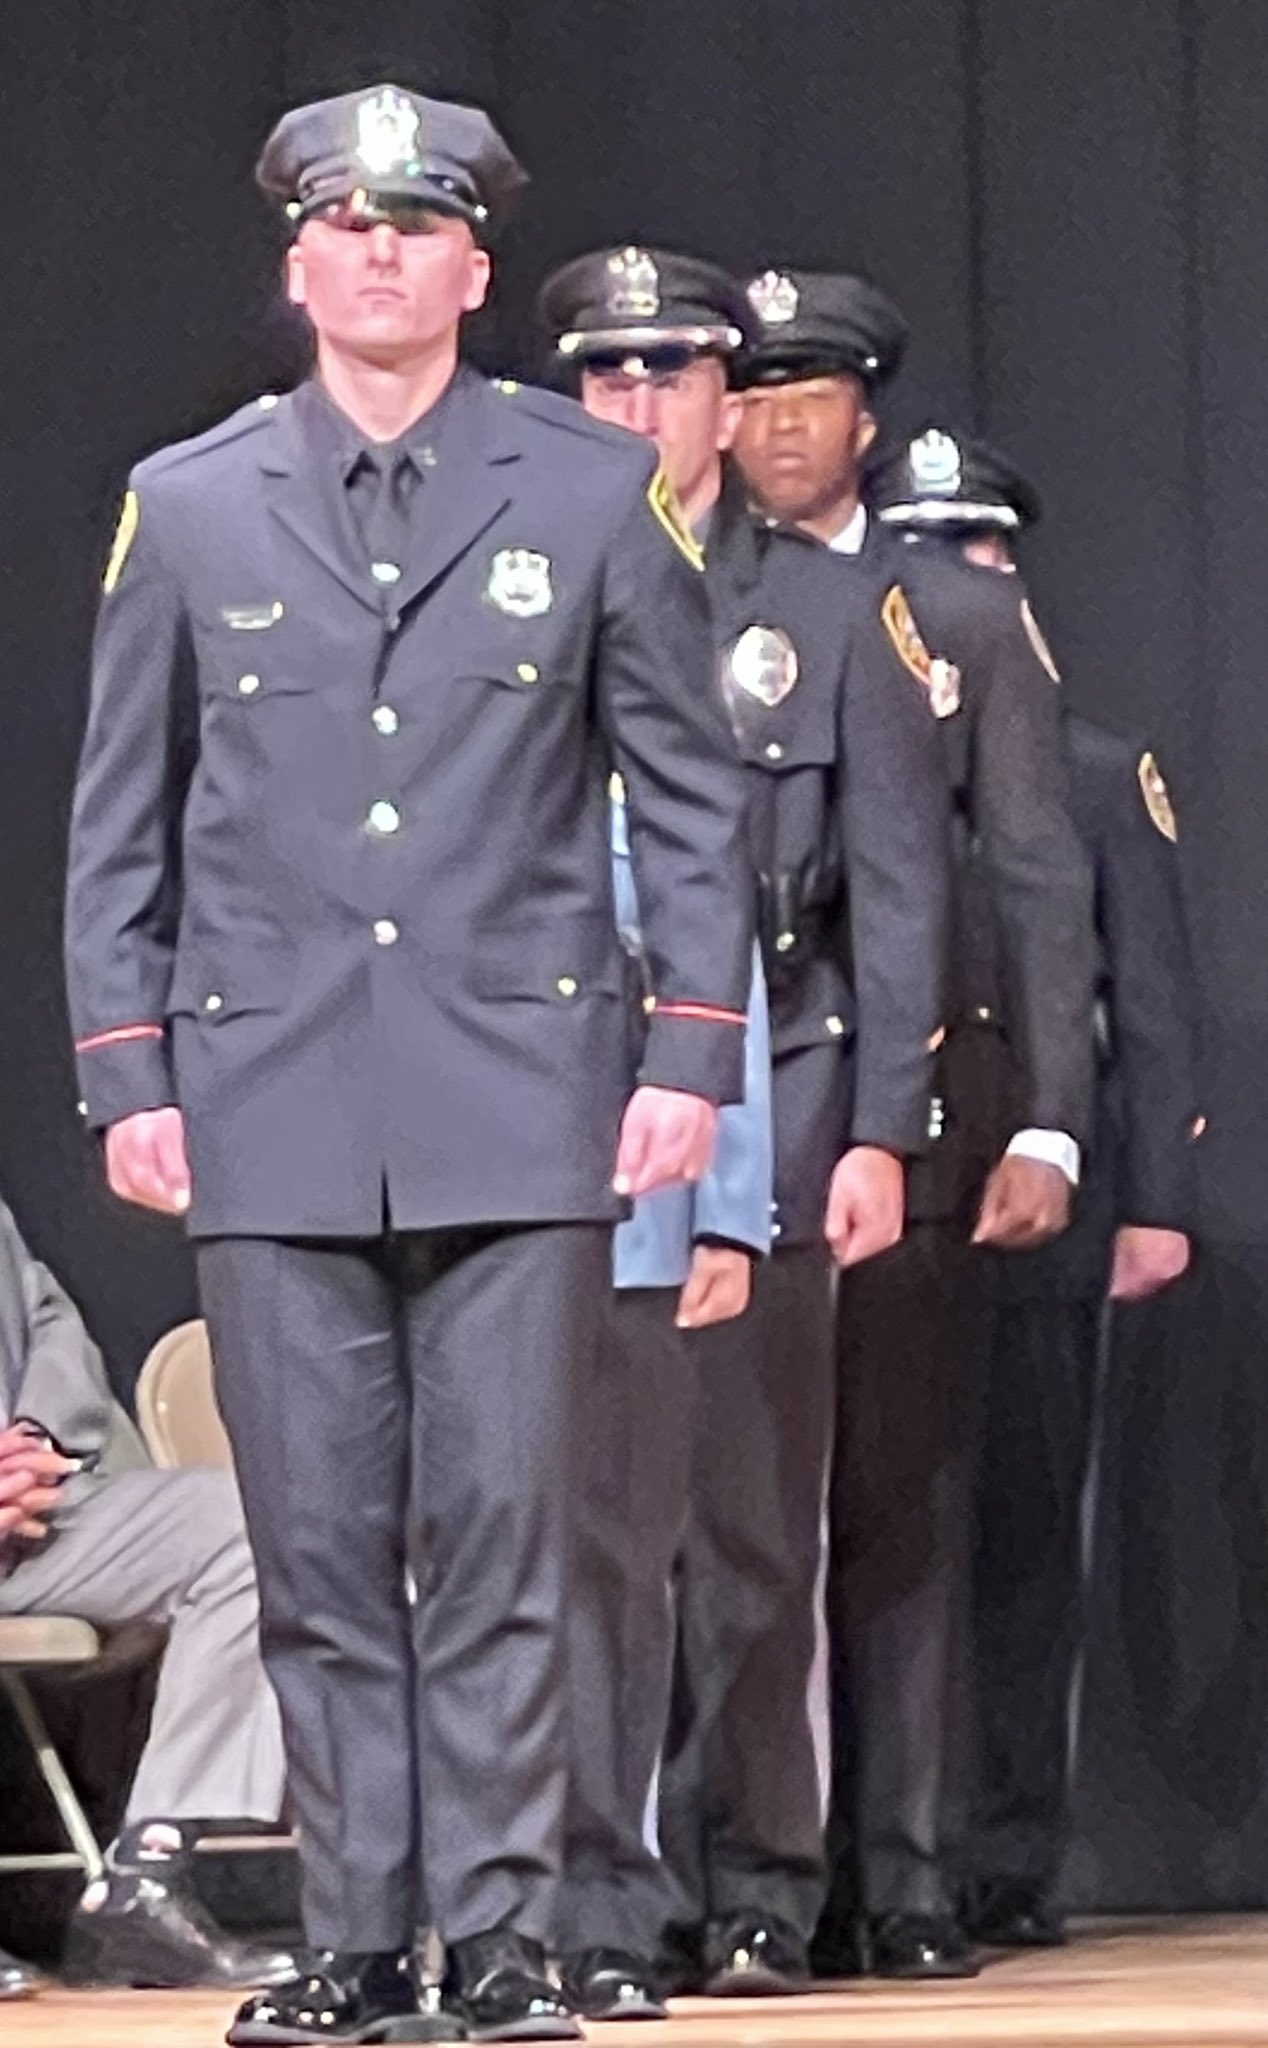 Union City Police On Twitter Ucpd Welcomes Our Newly Graduated